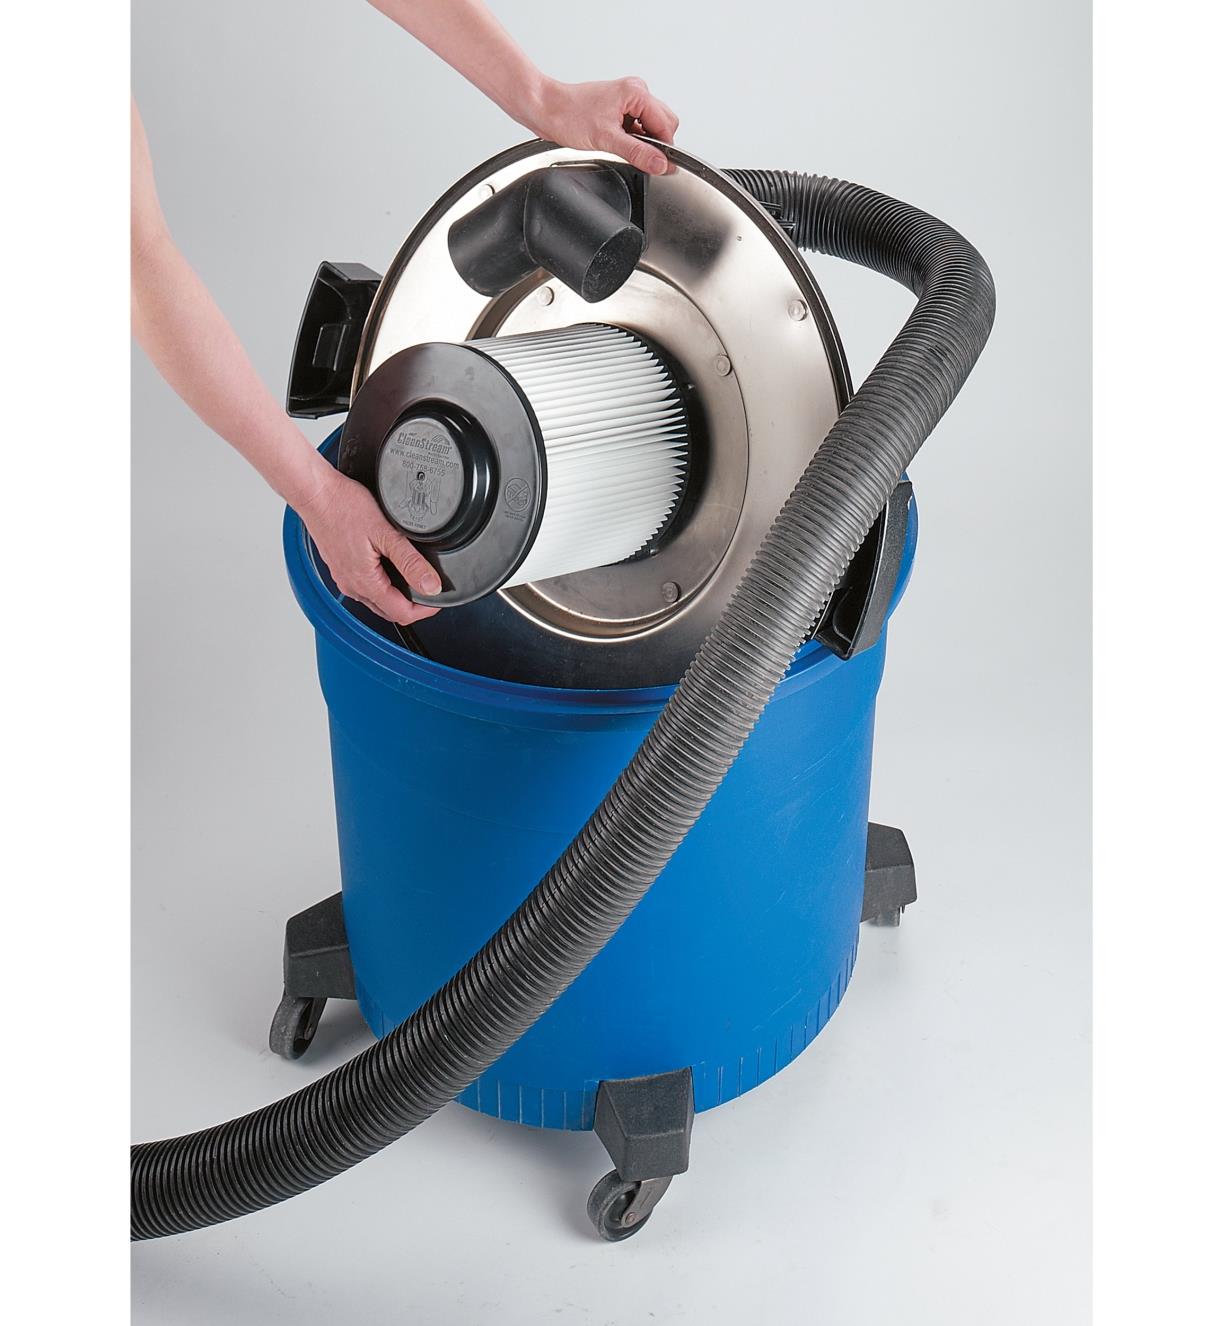 HEPA Filter installed in a shop vac